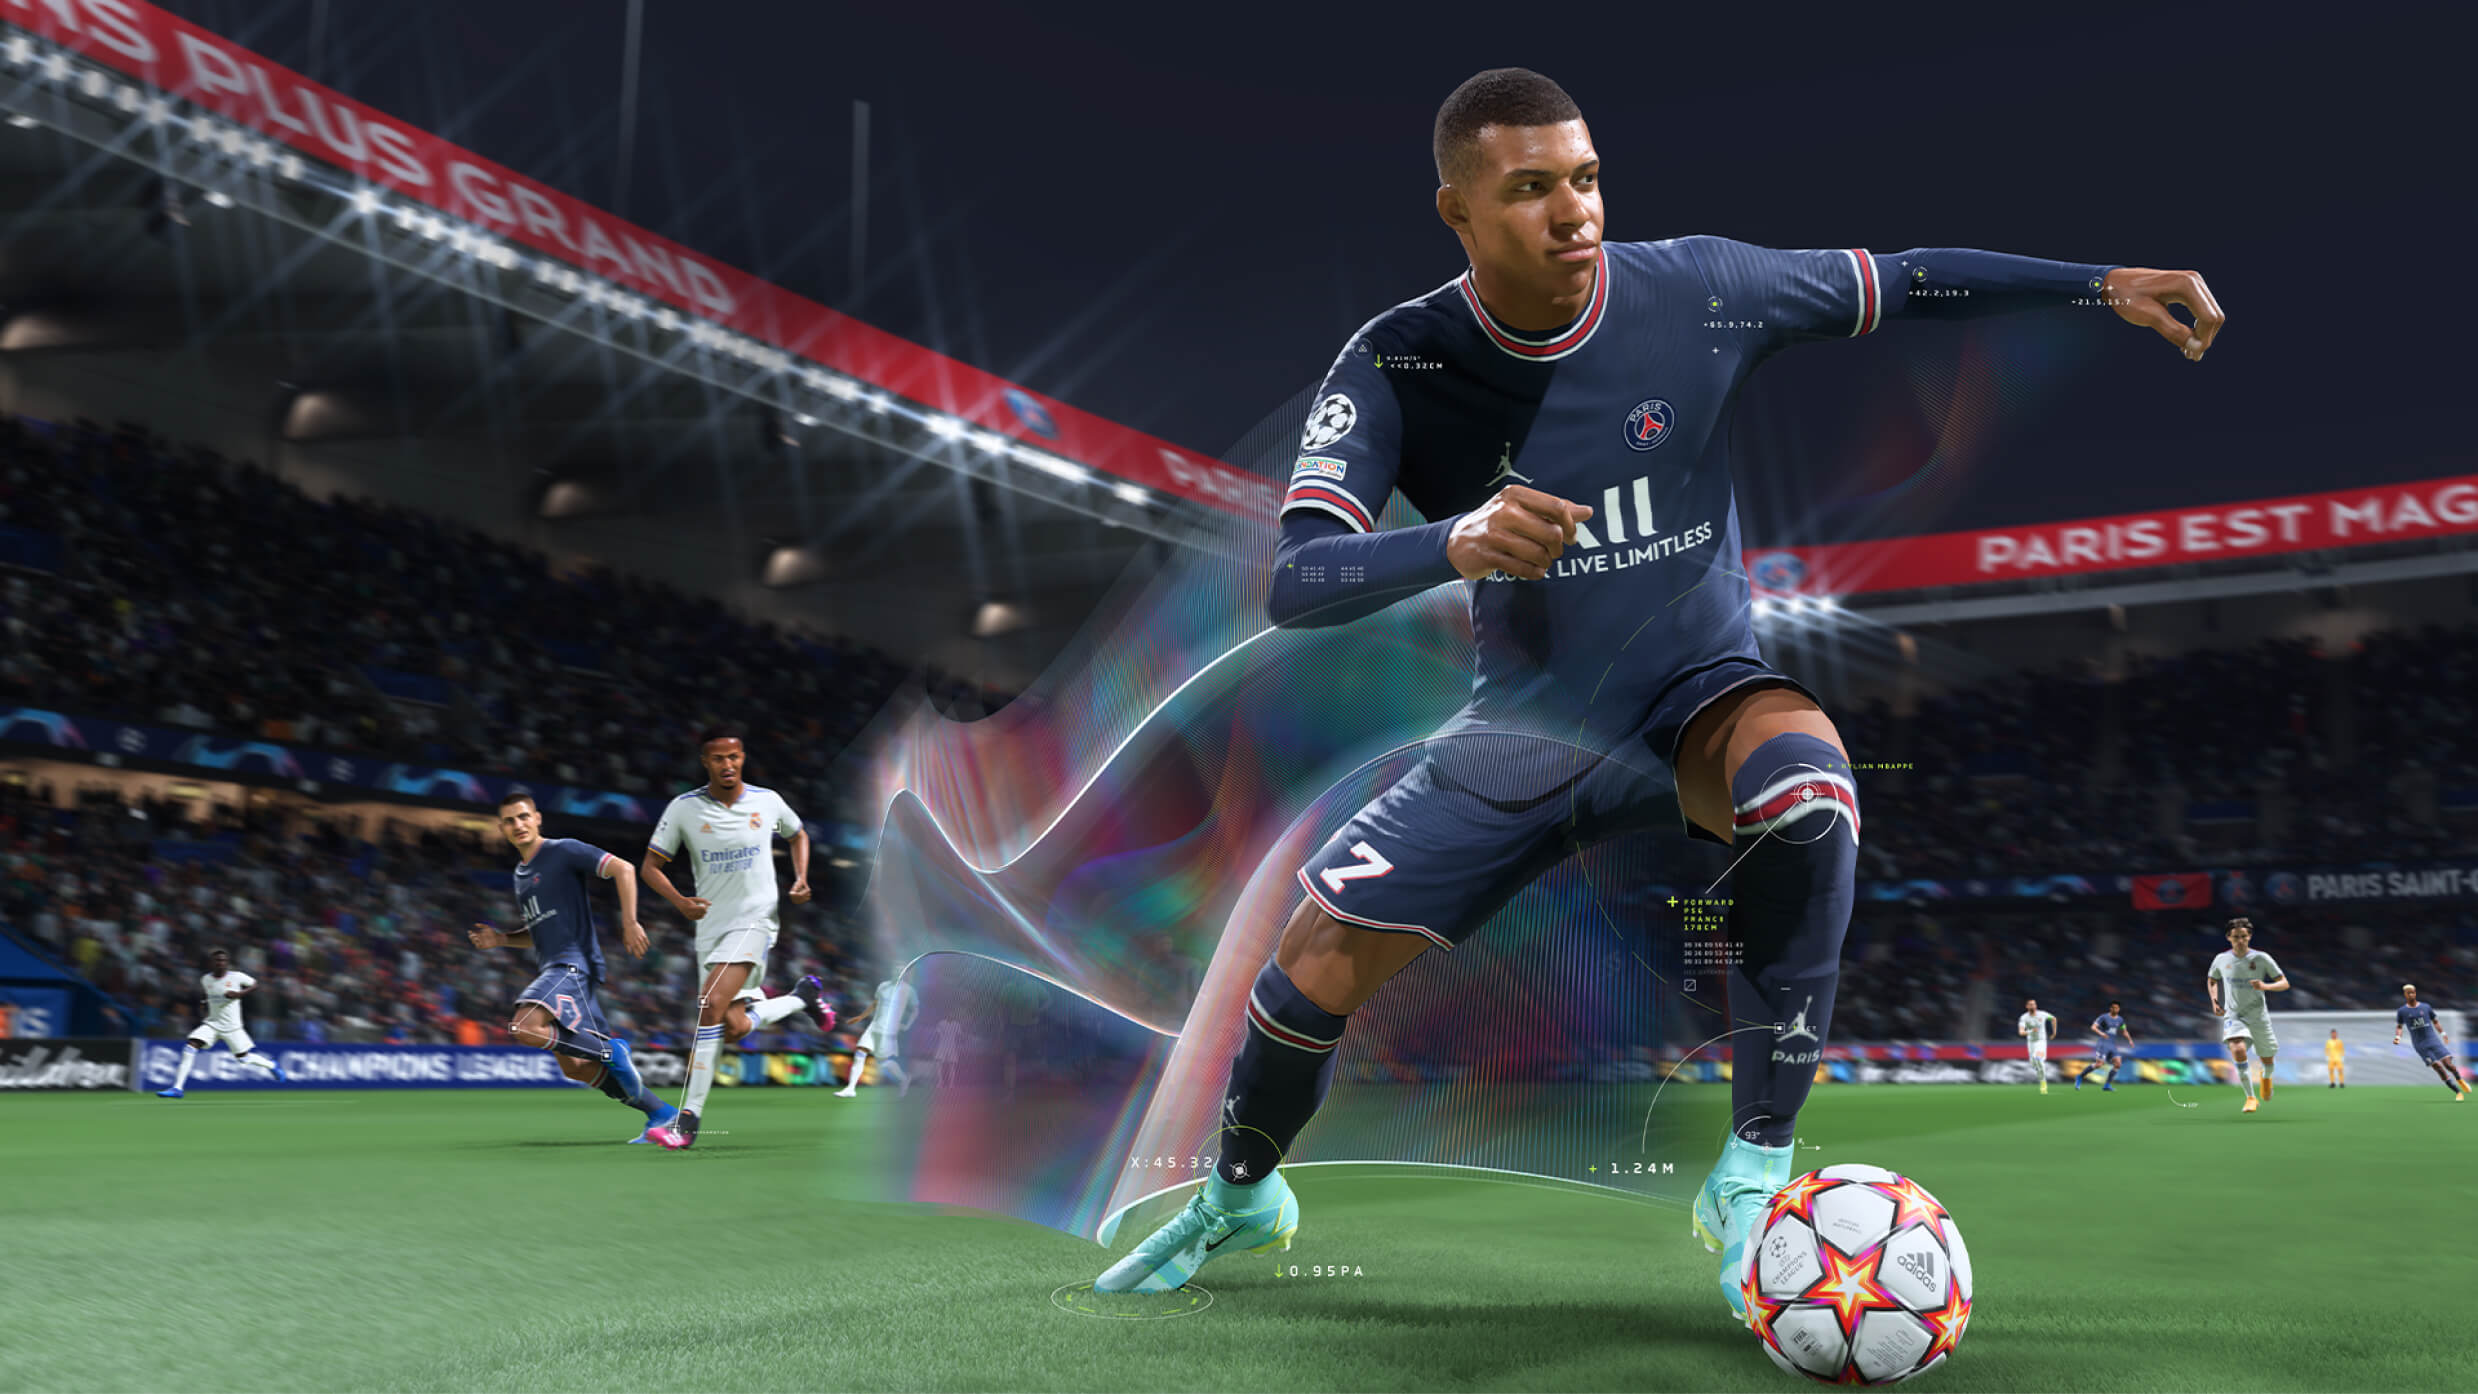 Rumour: 2K to get FIFA licence for new game this year